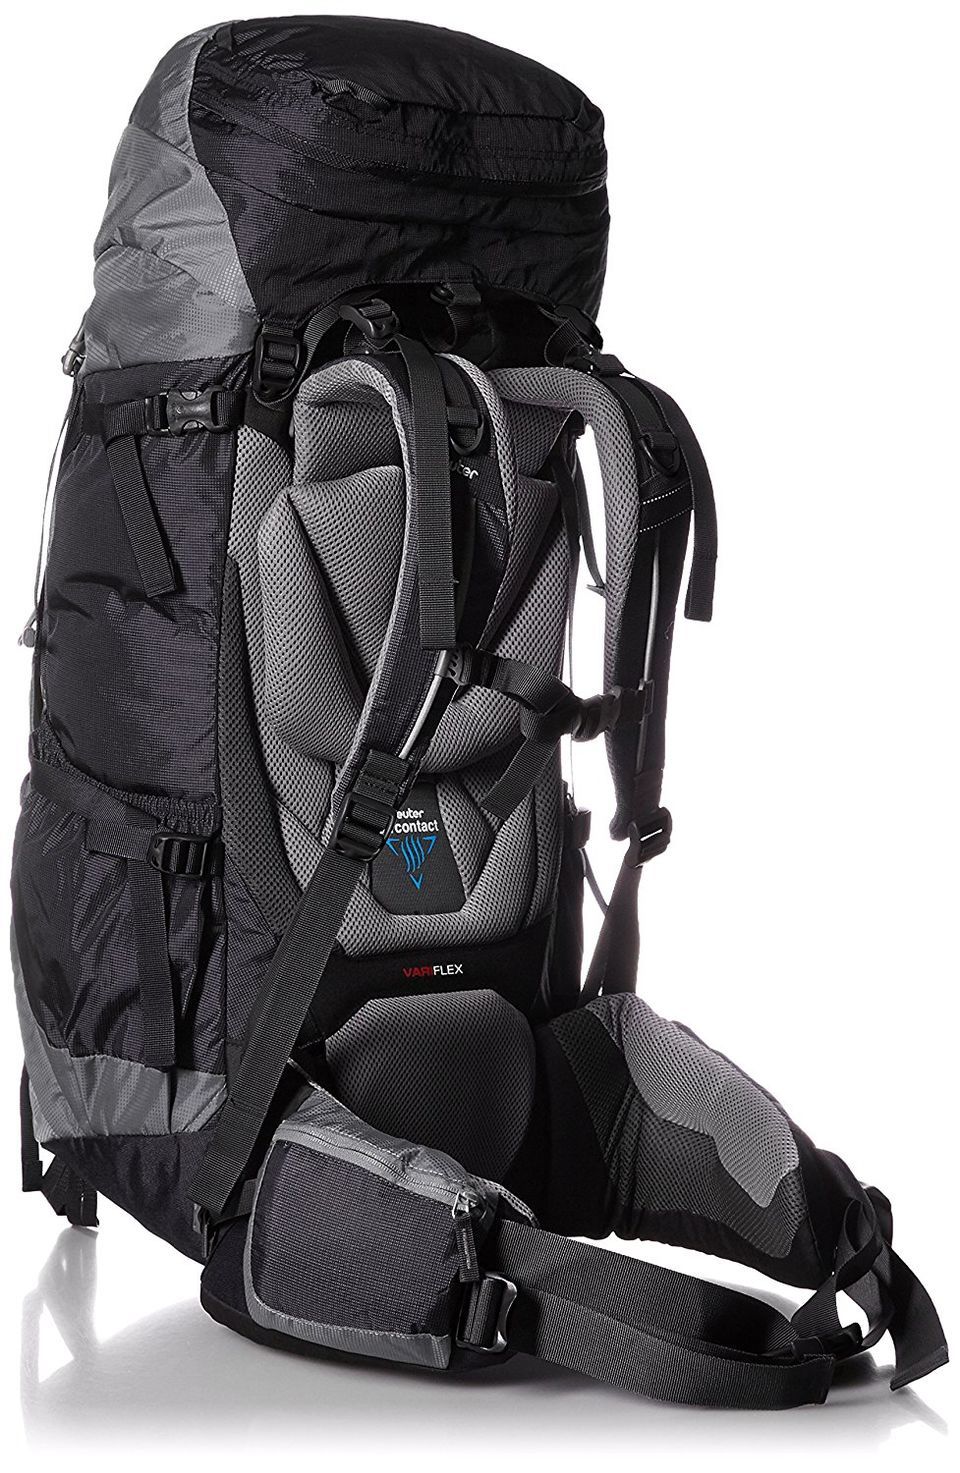 List of 10 Best Travel Backpacks With Their Cost, Capacity, And Other ... - 1511948403 1511948398 91lz3gzhahl Sl1500